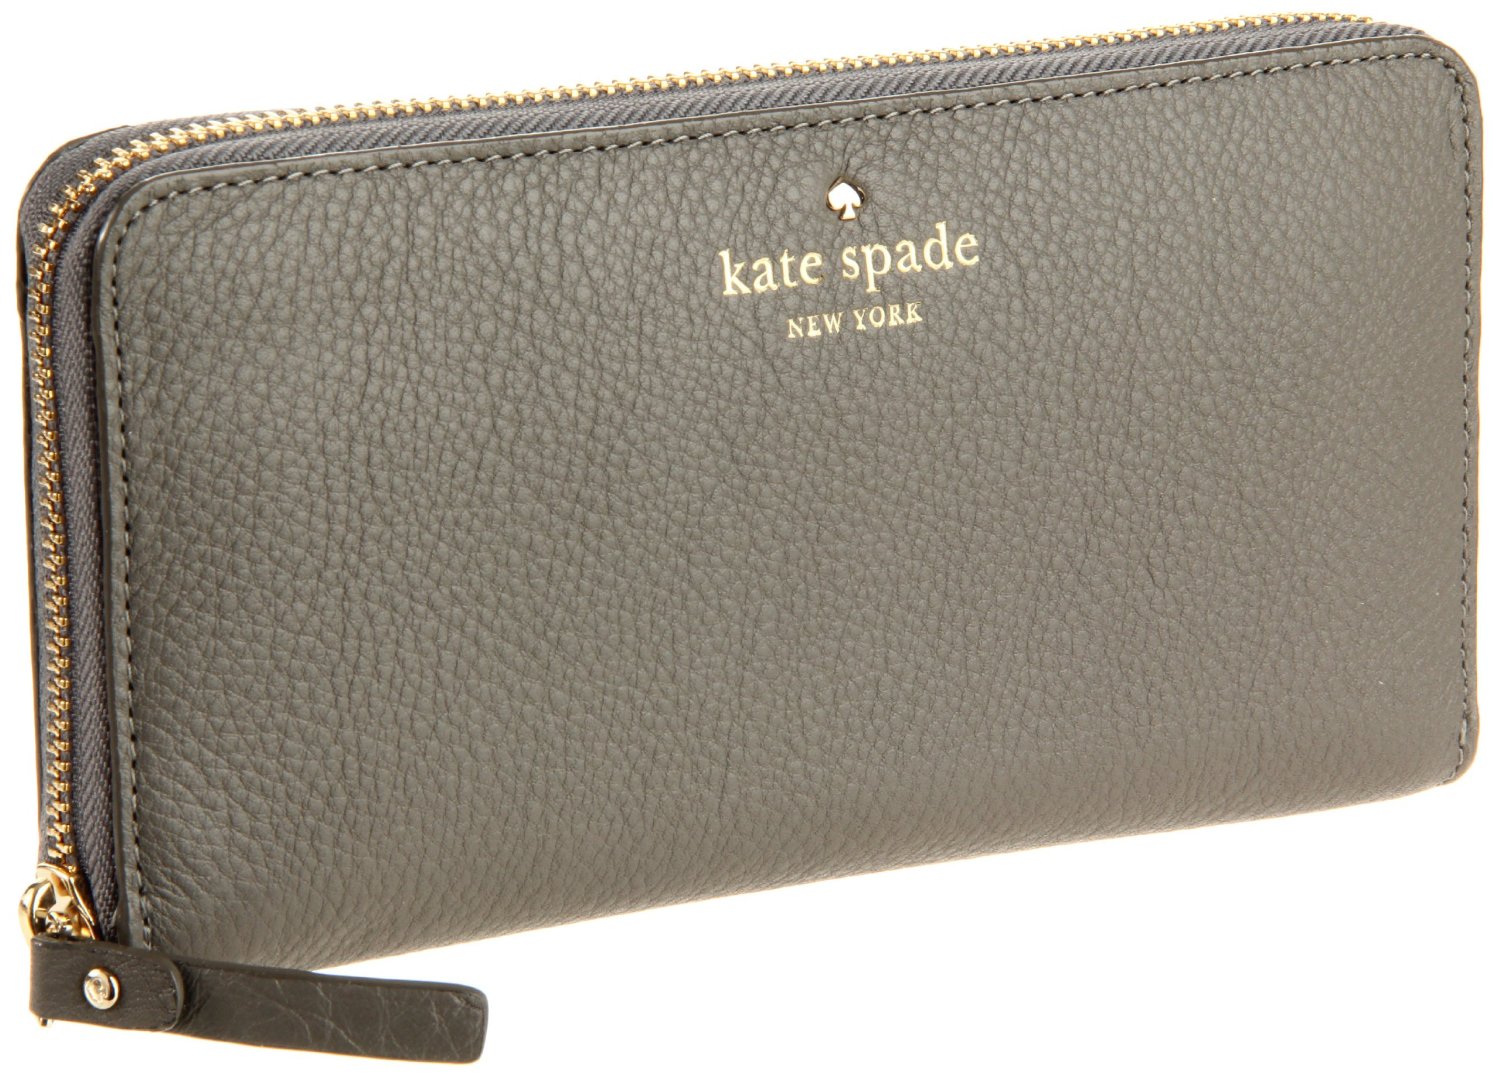 BagsPursuit Singapore: Kate Spade Wallets SALE!!! - Cheapest in Town - Guaranteed!!! (CLOSED)